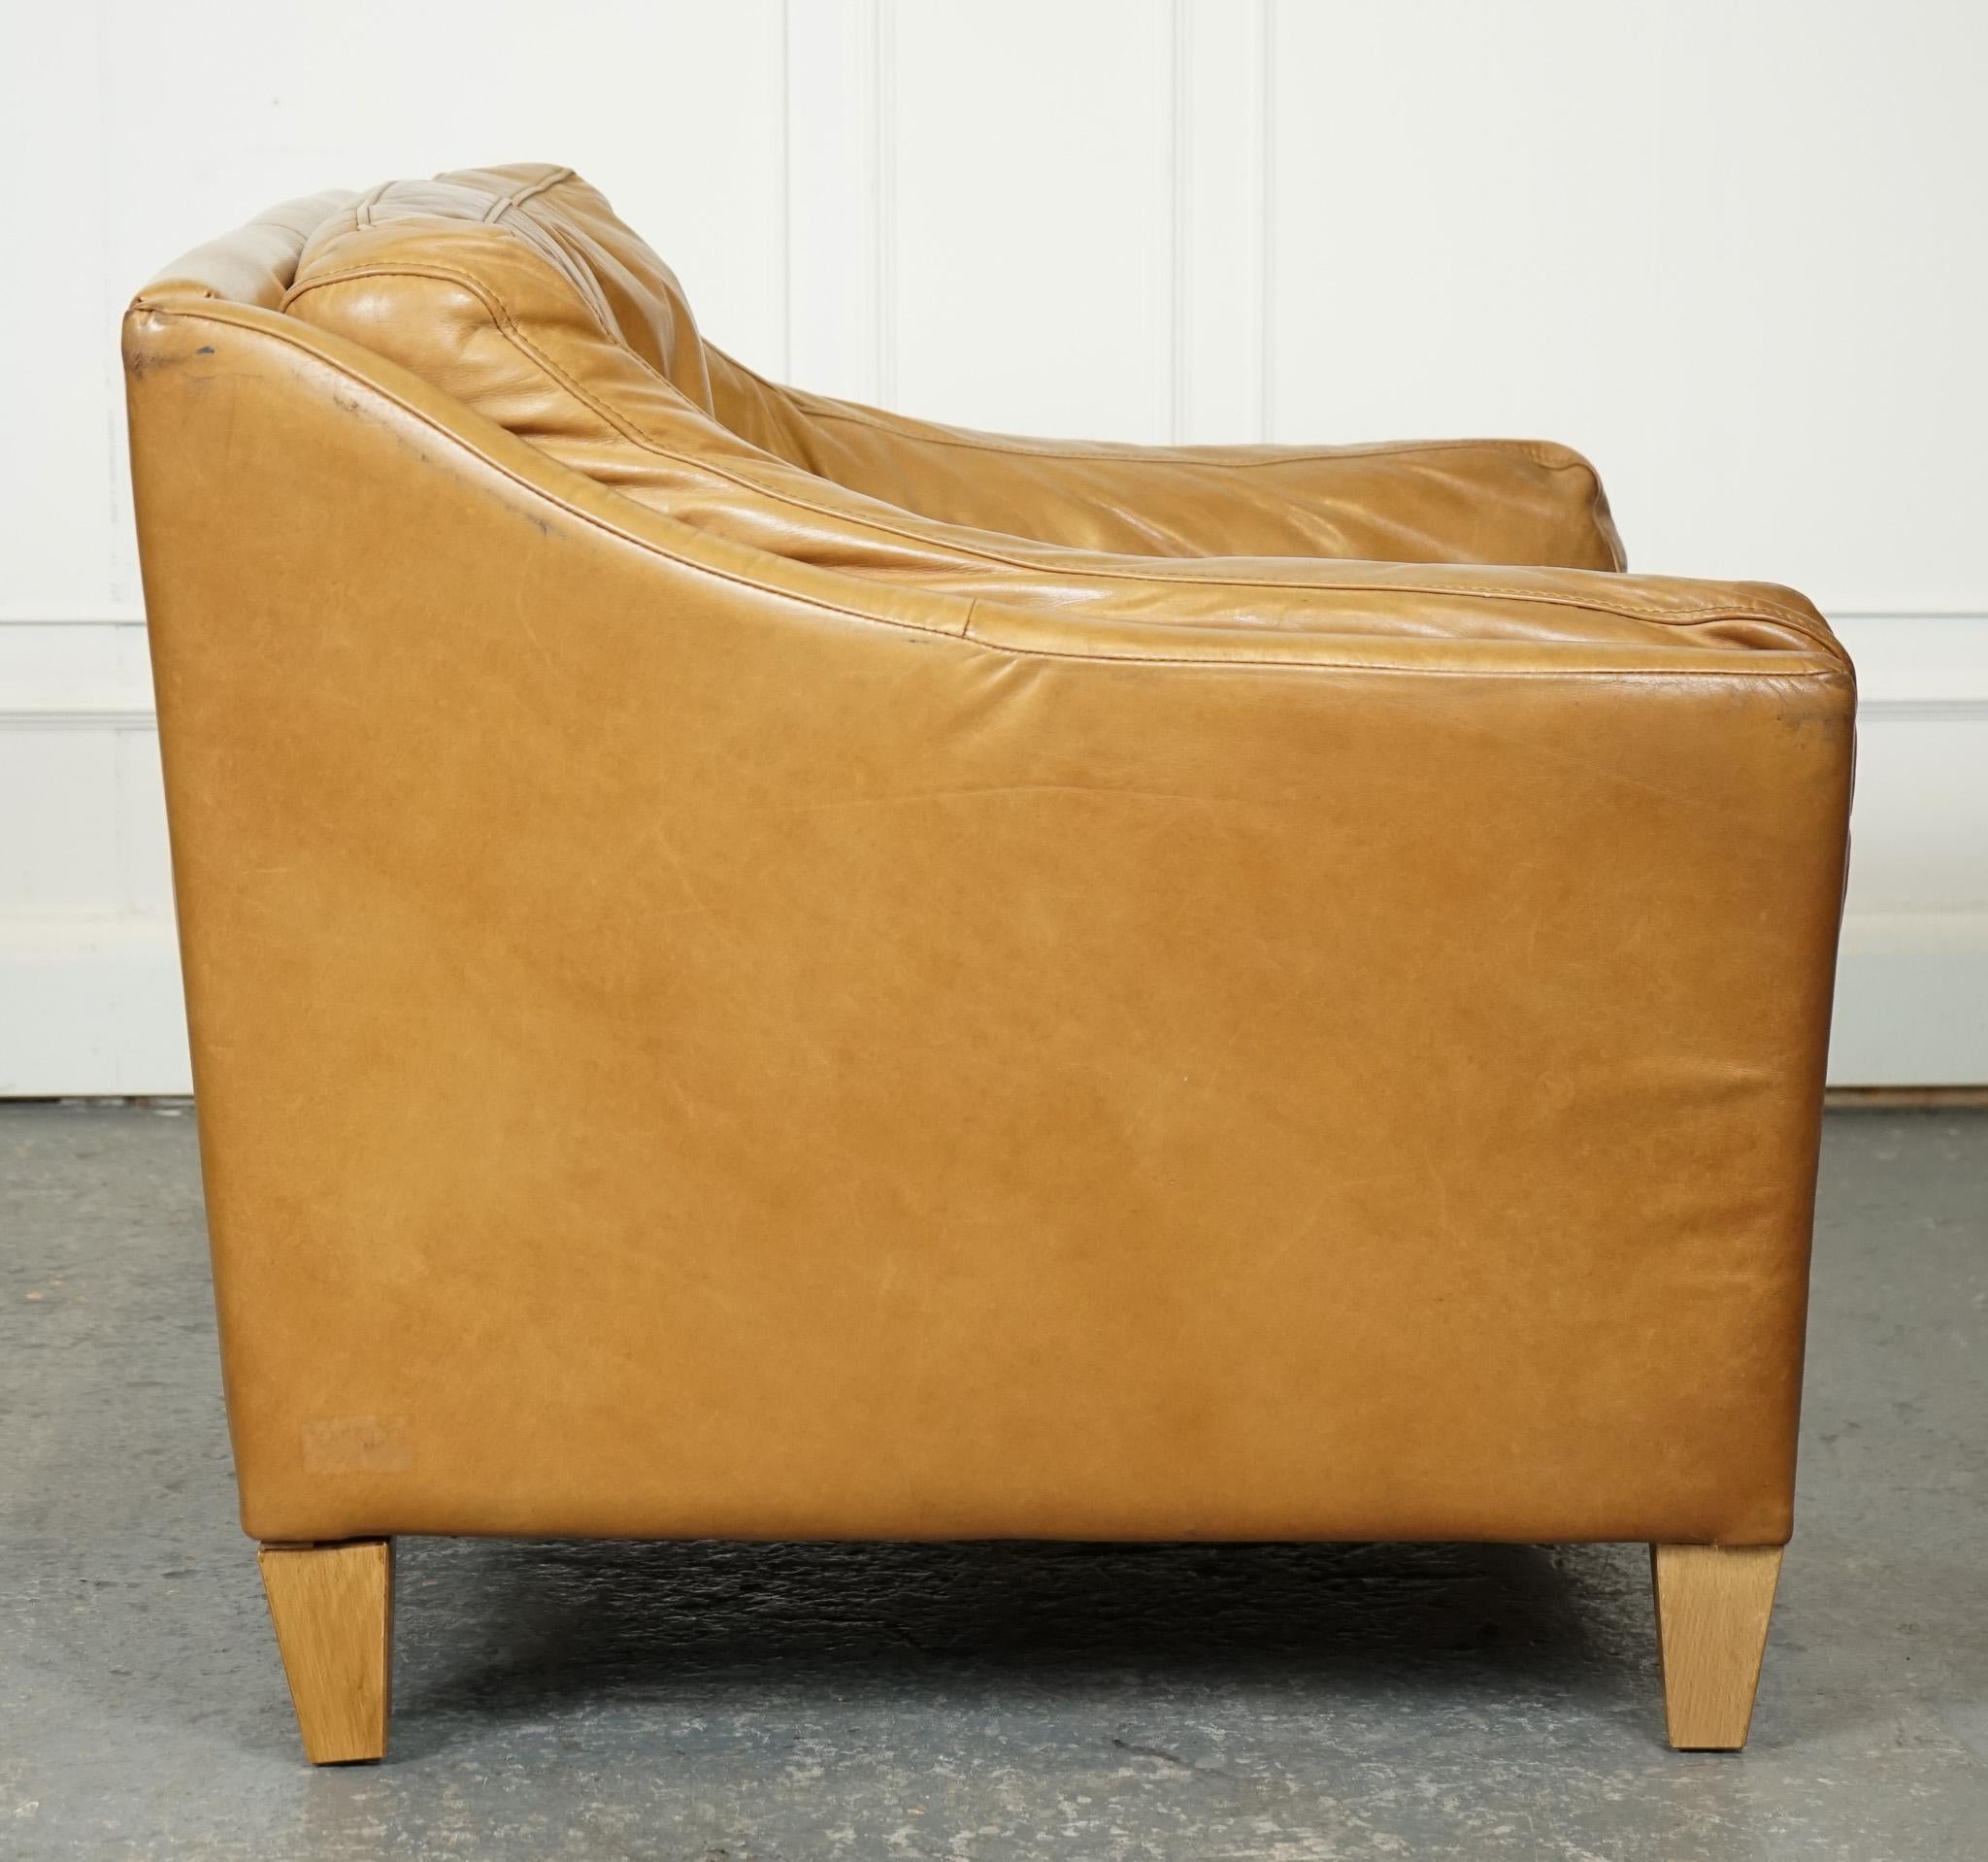 COMPACT AND VERY COMFORTABLE HALO REGGIO TAN LEATHER ARMCHAiR For Sale 1